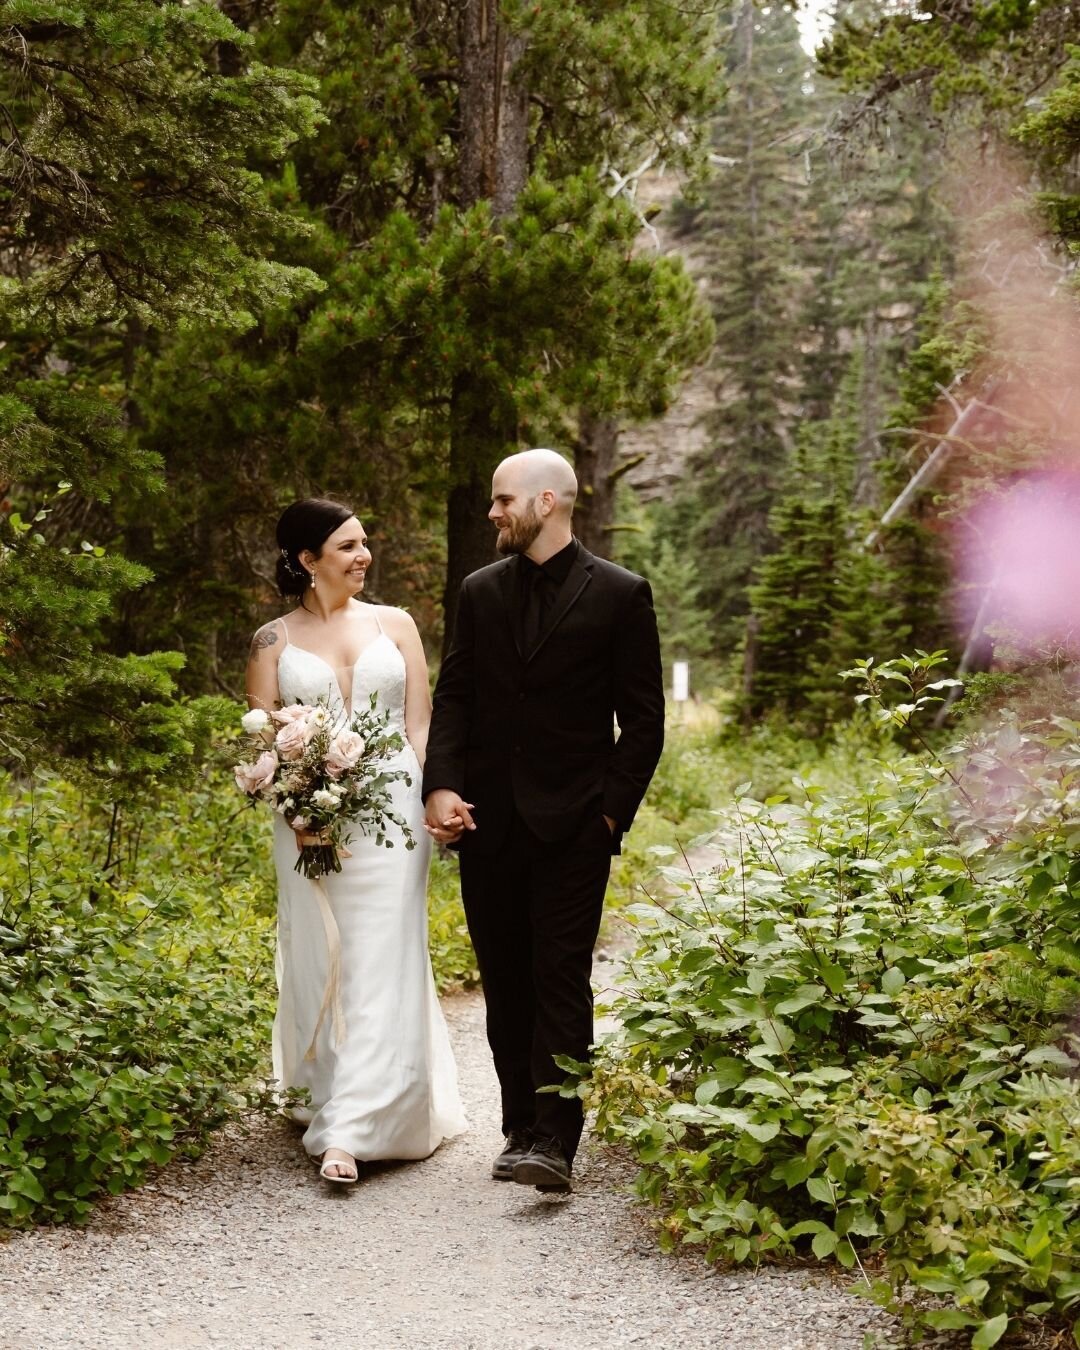 B &amp; P's Glacier National Park Wedding Highlights!⁣
⁣
From their private vows in Glacier's iconic meadow along the Going to the Sun Road, their hike with their bridal party to an insane vista view, their alpine lake wedding ceremony, to their inti